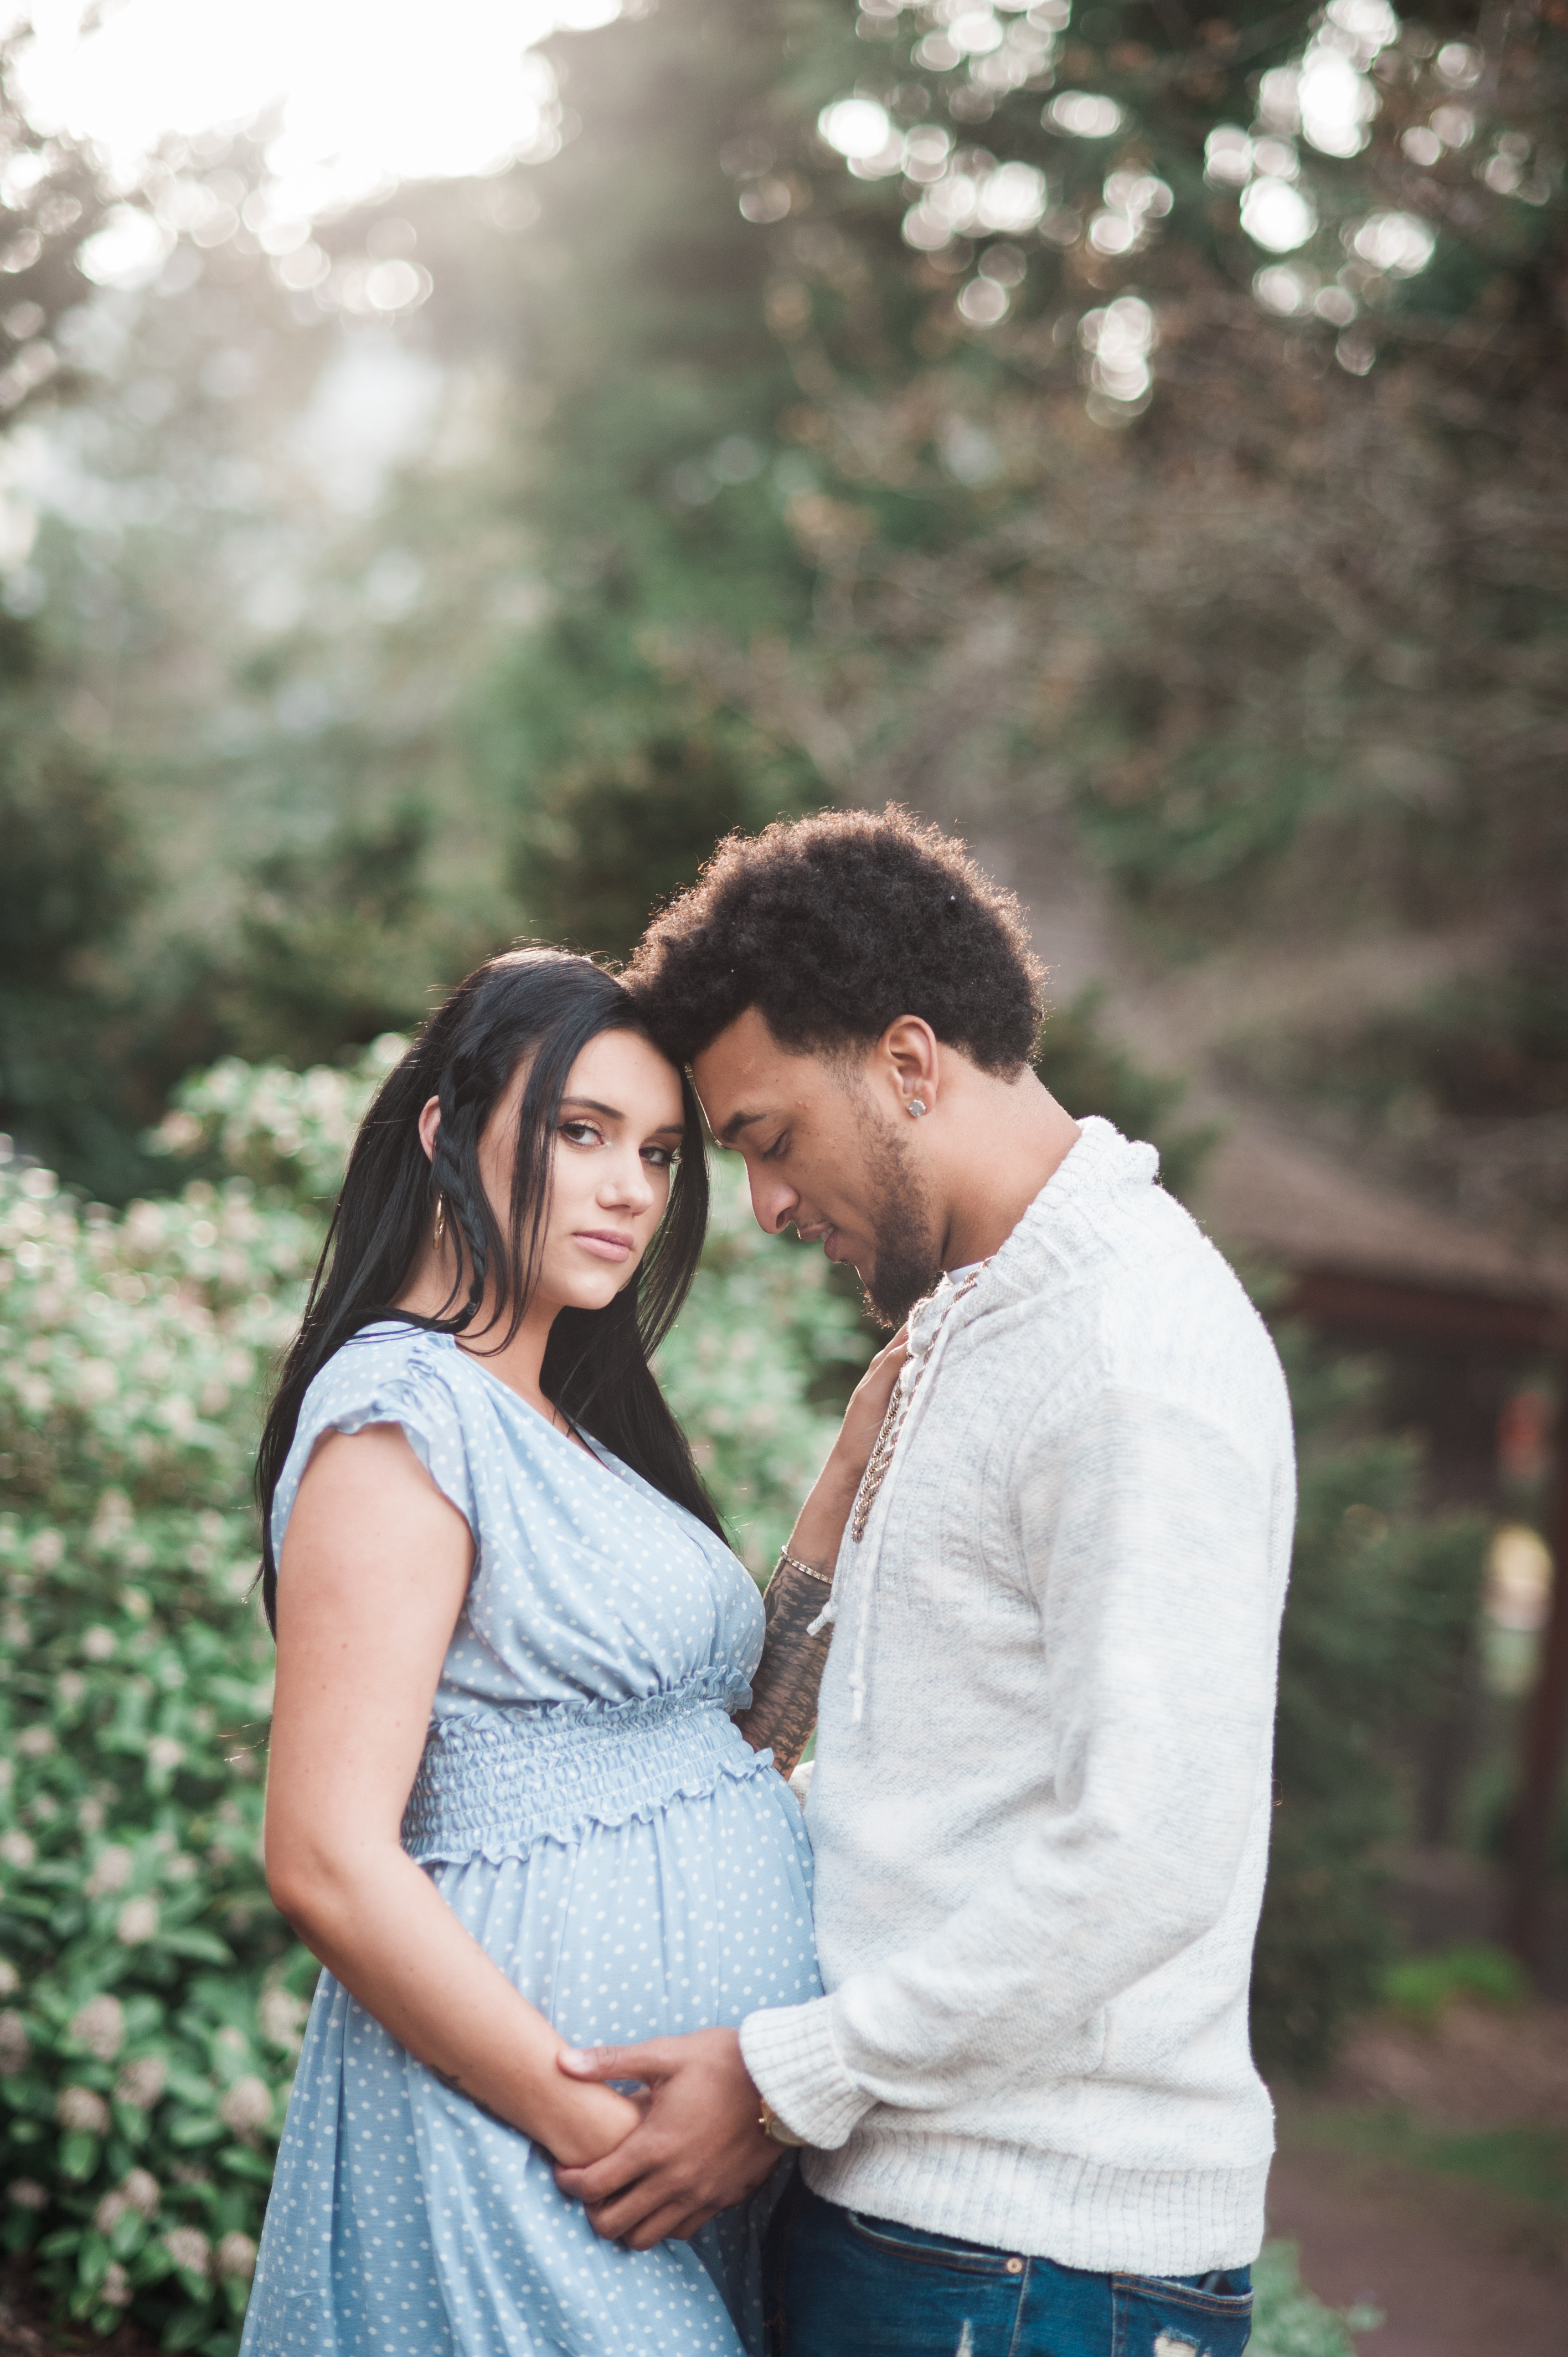 Stunning Maternity Portrait of Couple with soft light photographed by Tacoma Photographer Amanda Howse